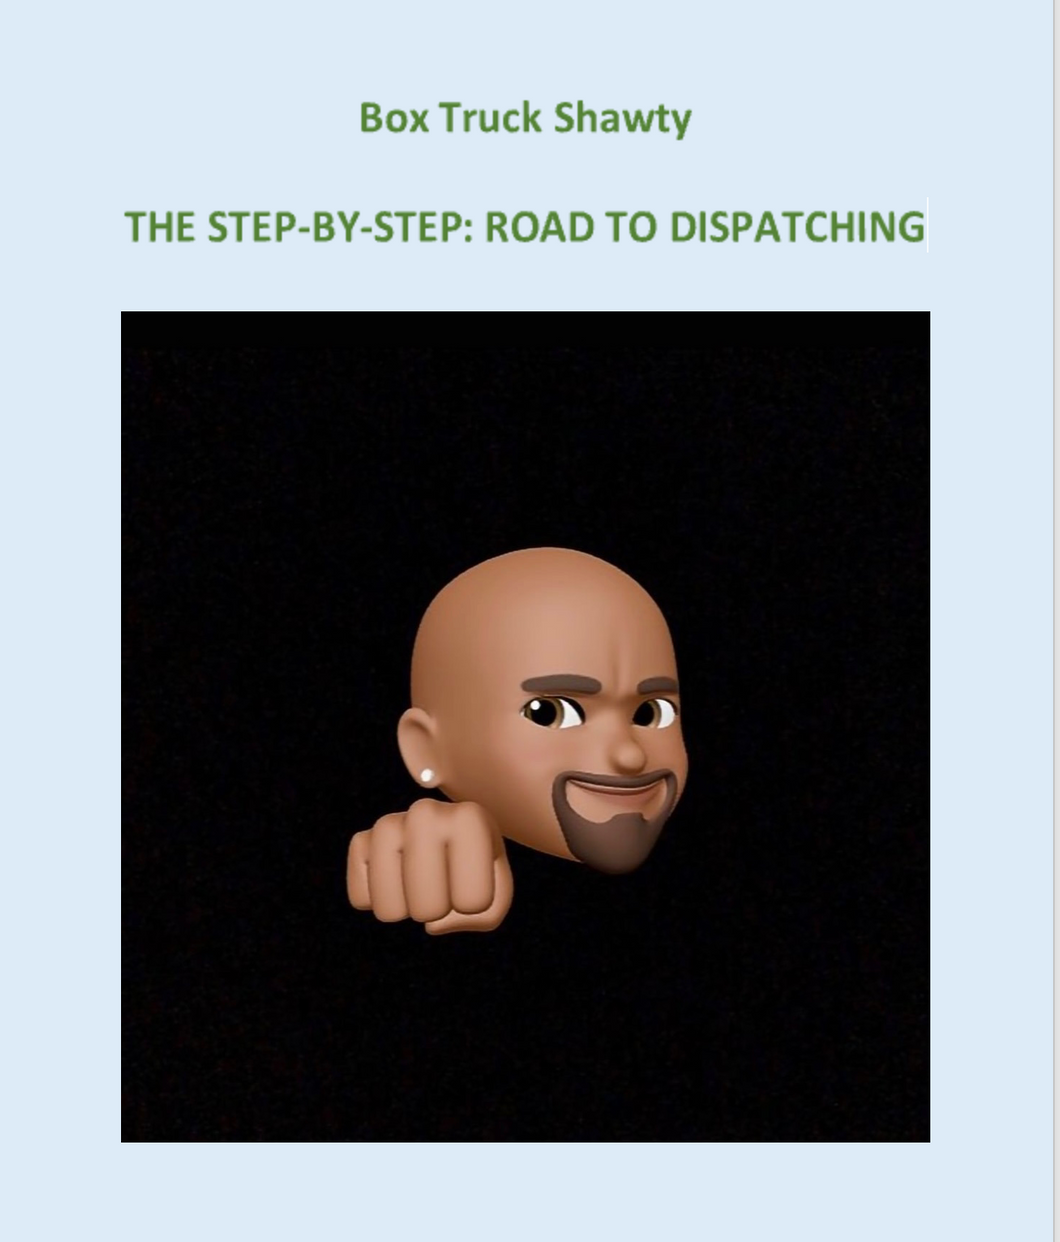 BOX TRUCK SHAWTY - THE STEP BY STEP ROAD TO DISPATCHING